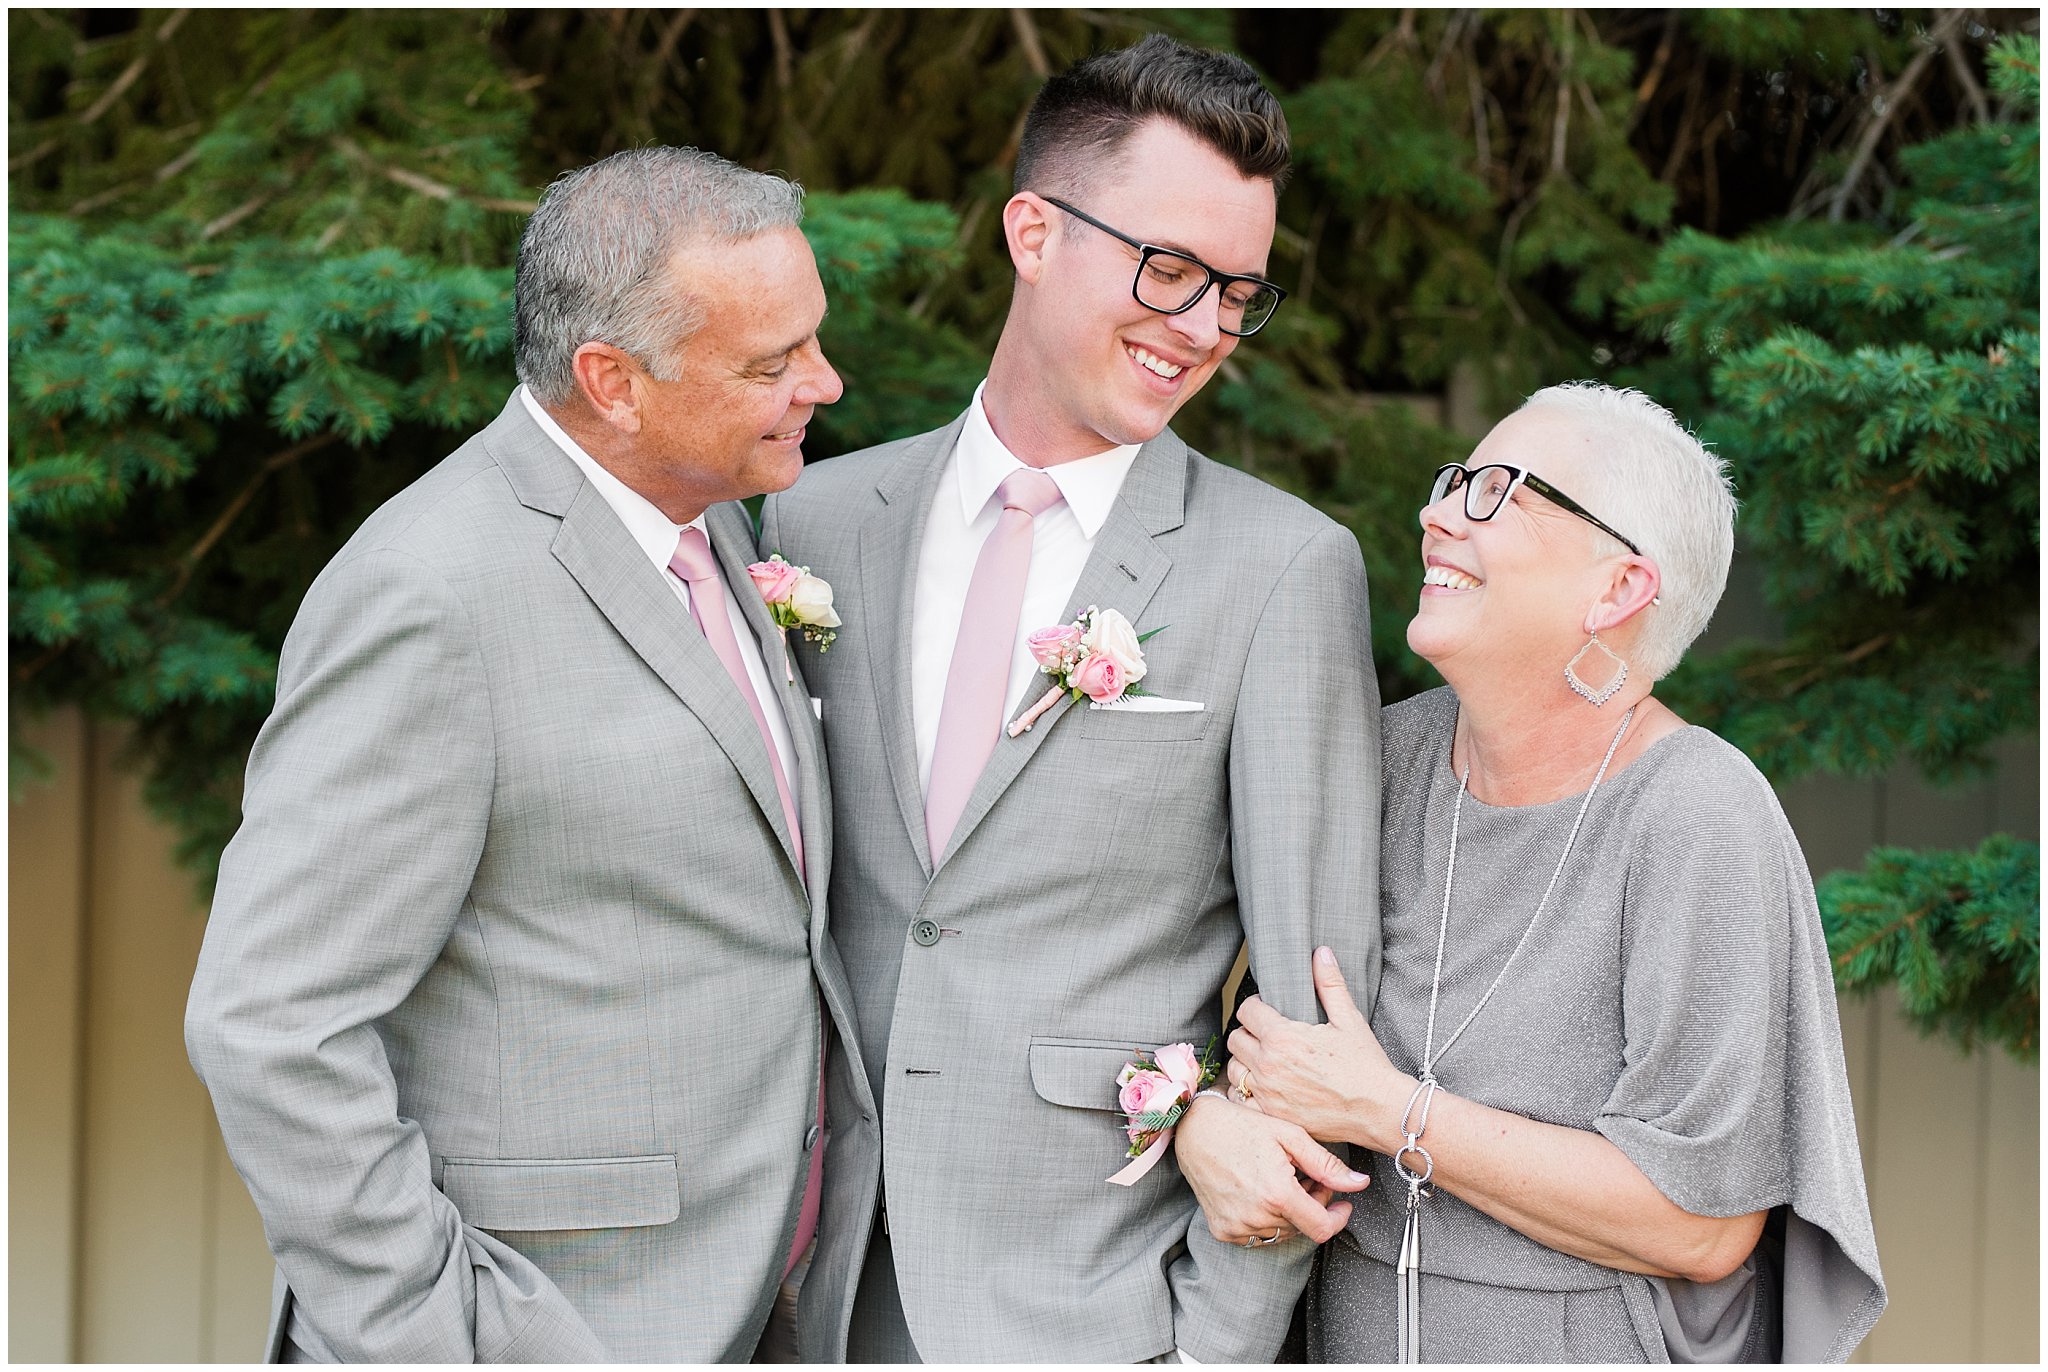 Groom and parents laughing | Oak Hills Utah Dusty Rose and Gray Summer Wedding | Jessie and Dallin Photography